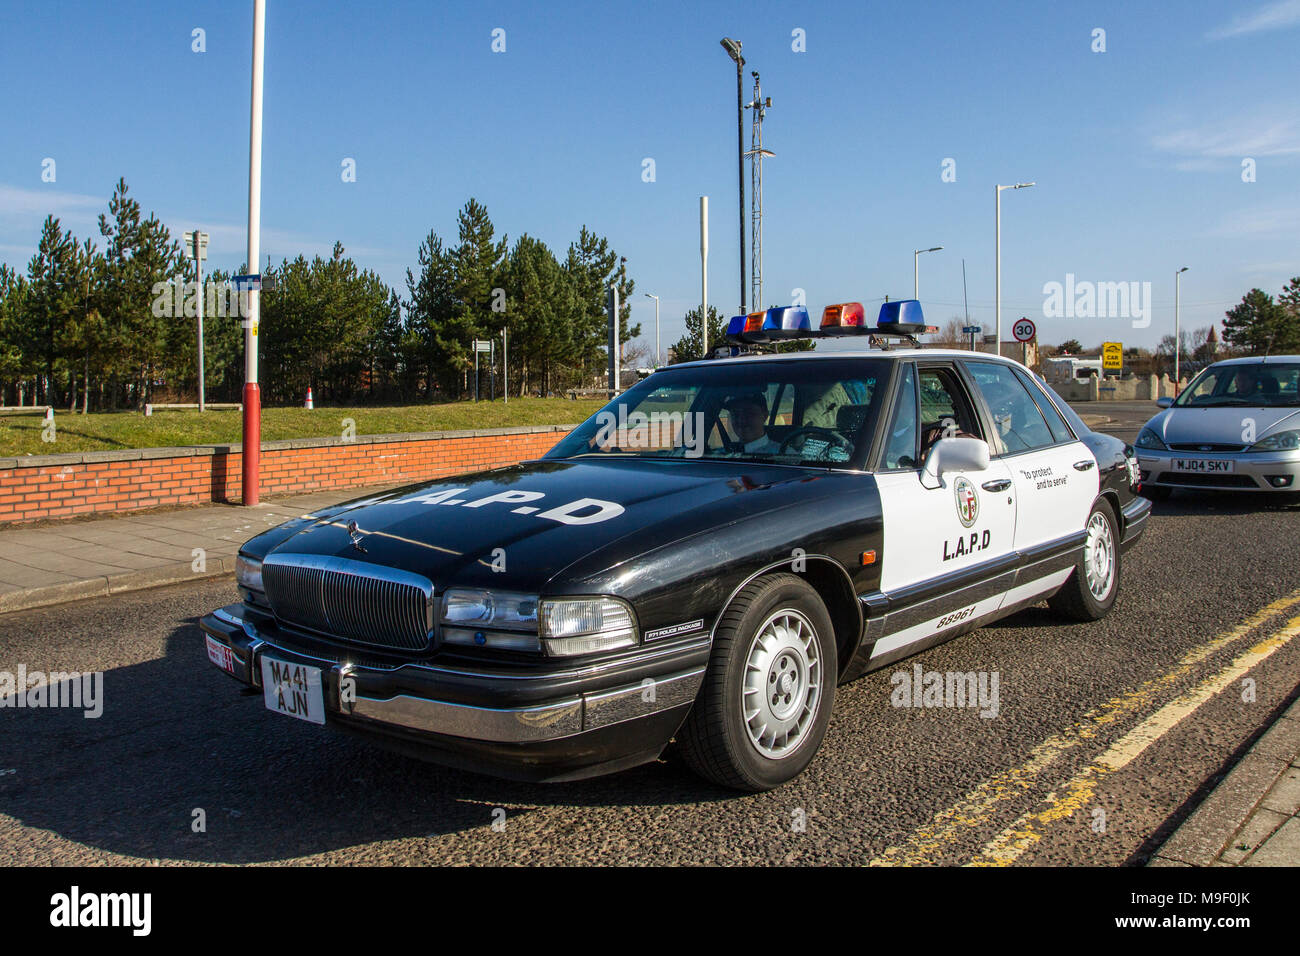 1994 90s LAPD American Buick Police Car 3800cc petrol vehicle at the North-West Supercar event as cars and tourists arrive in the coastal resort of Southport.  USA SuperCars are bumper to bumper on the seafront esplanade as 90s classic & usa car enthusiasts enjoy a motoring day out. Stock Photo